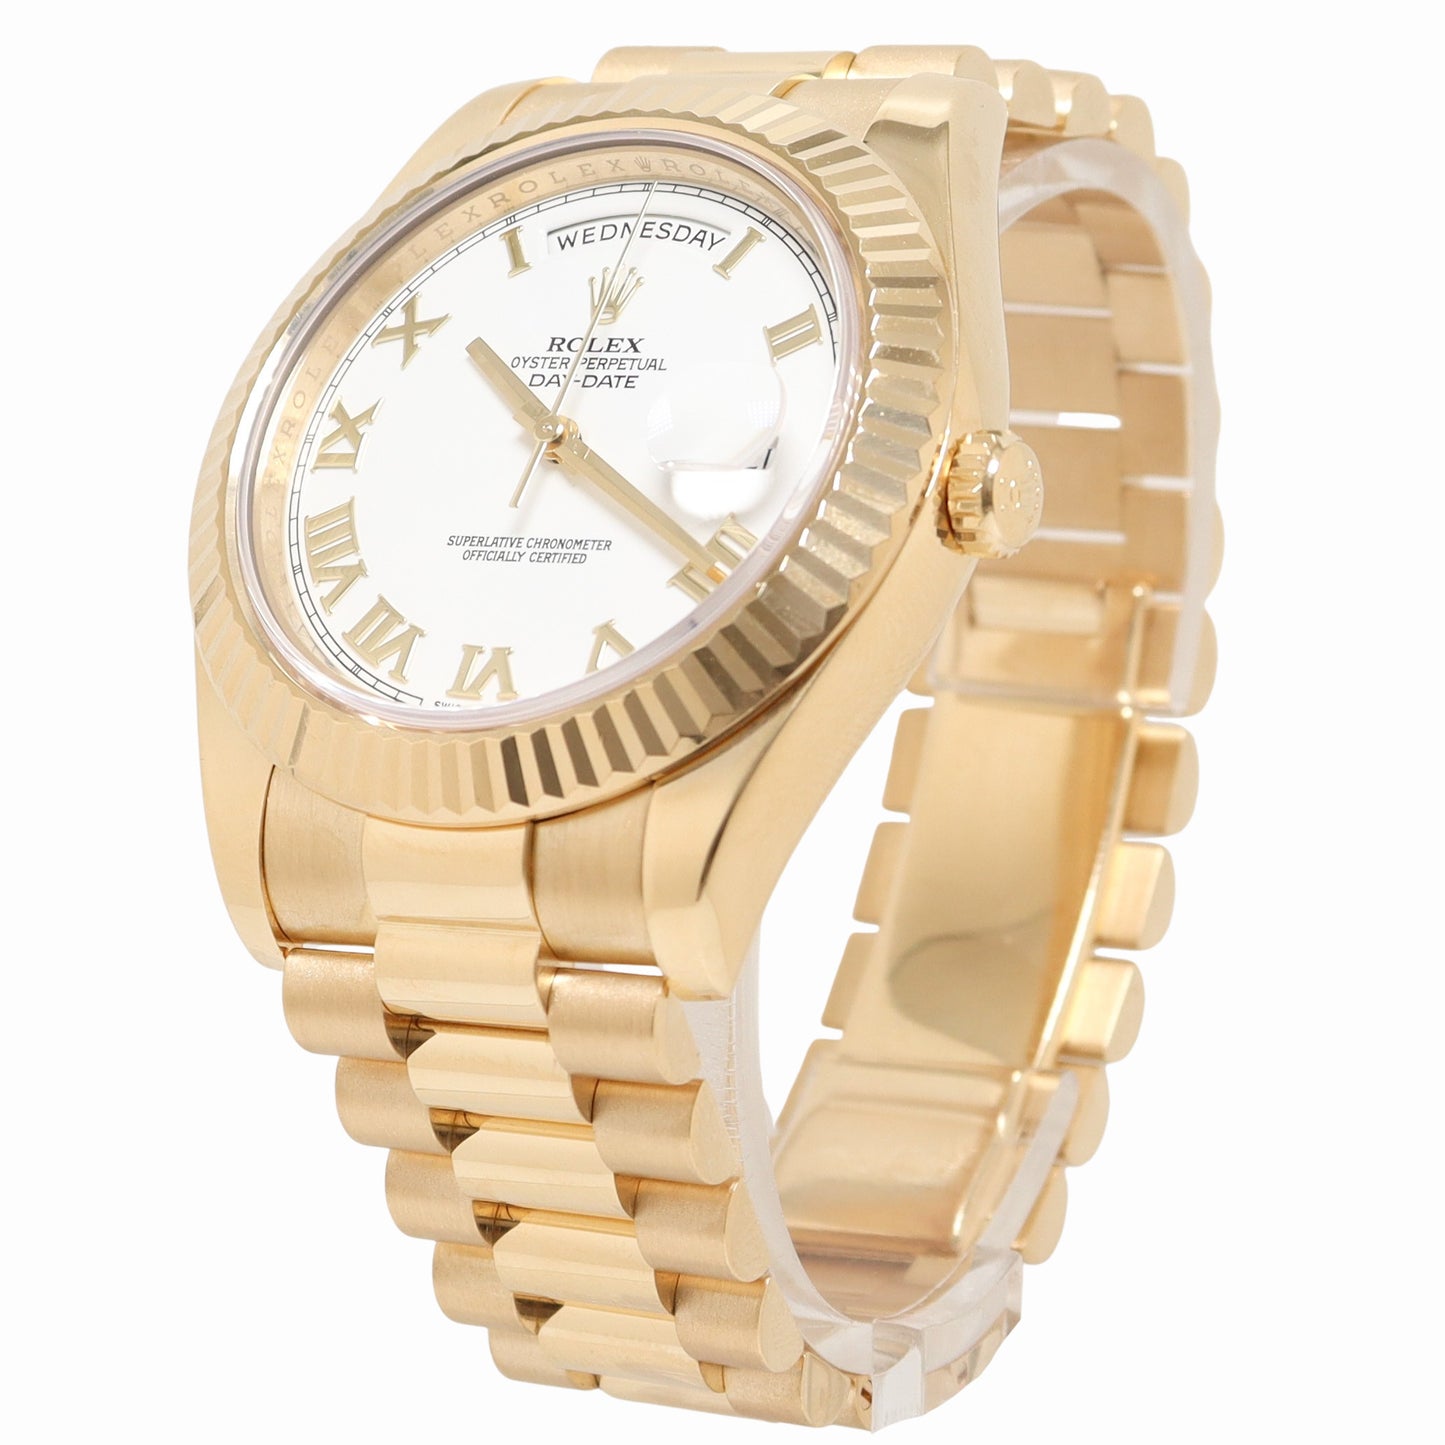 Rolex Day-Date Yellow Gold 41mm White Roman Dial Watch Reference# 218238 - Happy Jewelers Fine Jewelry Lifetime Warranty